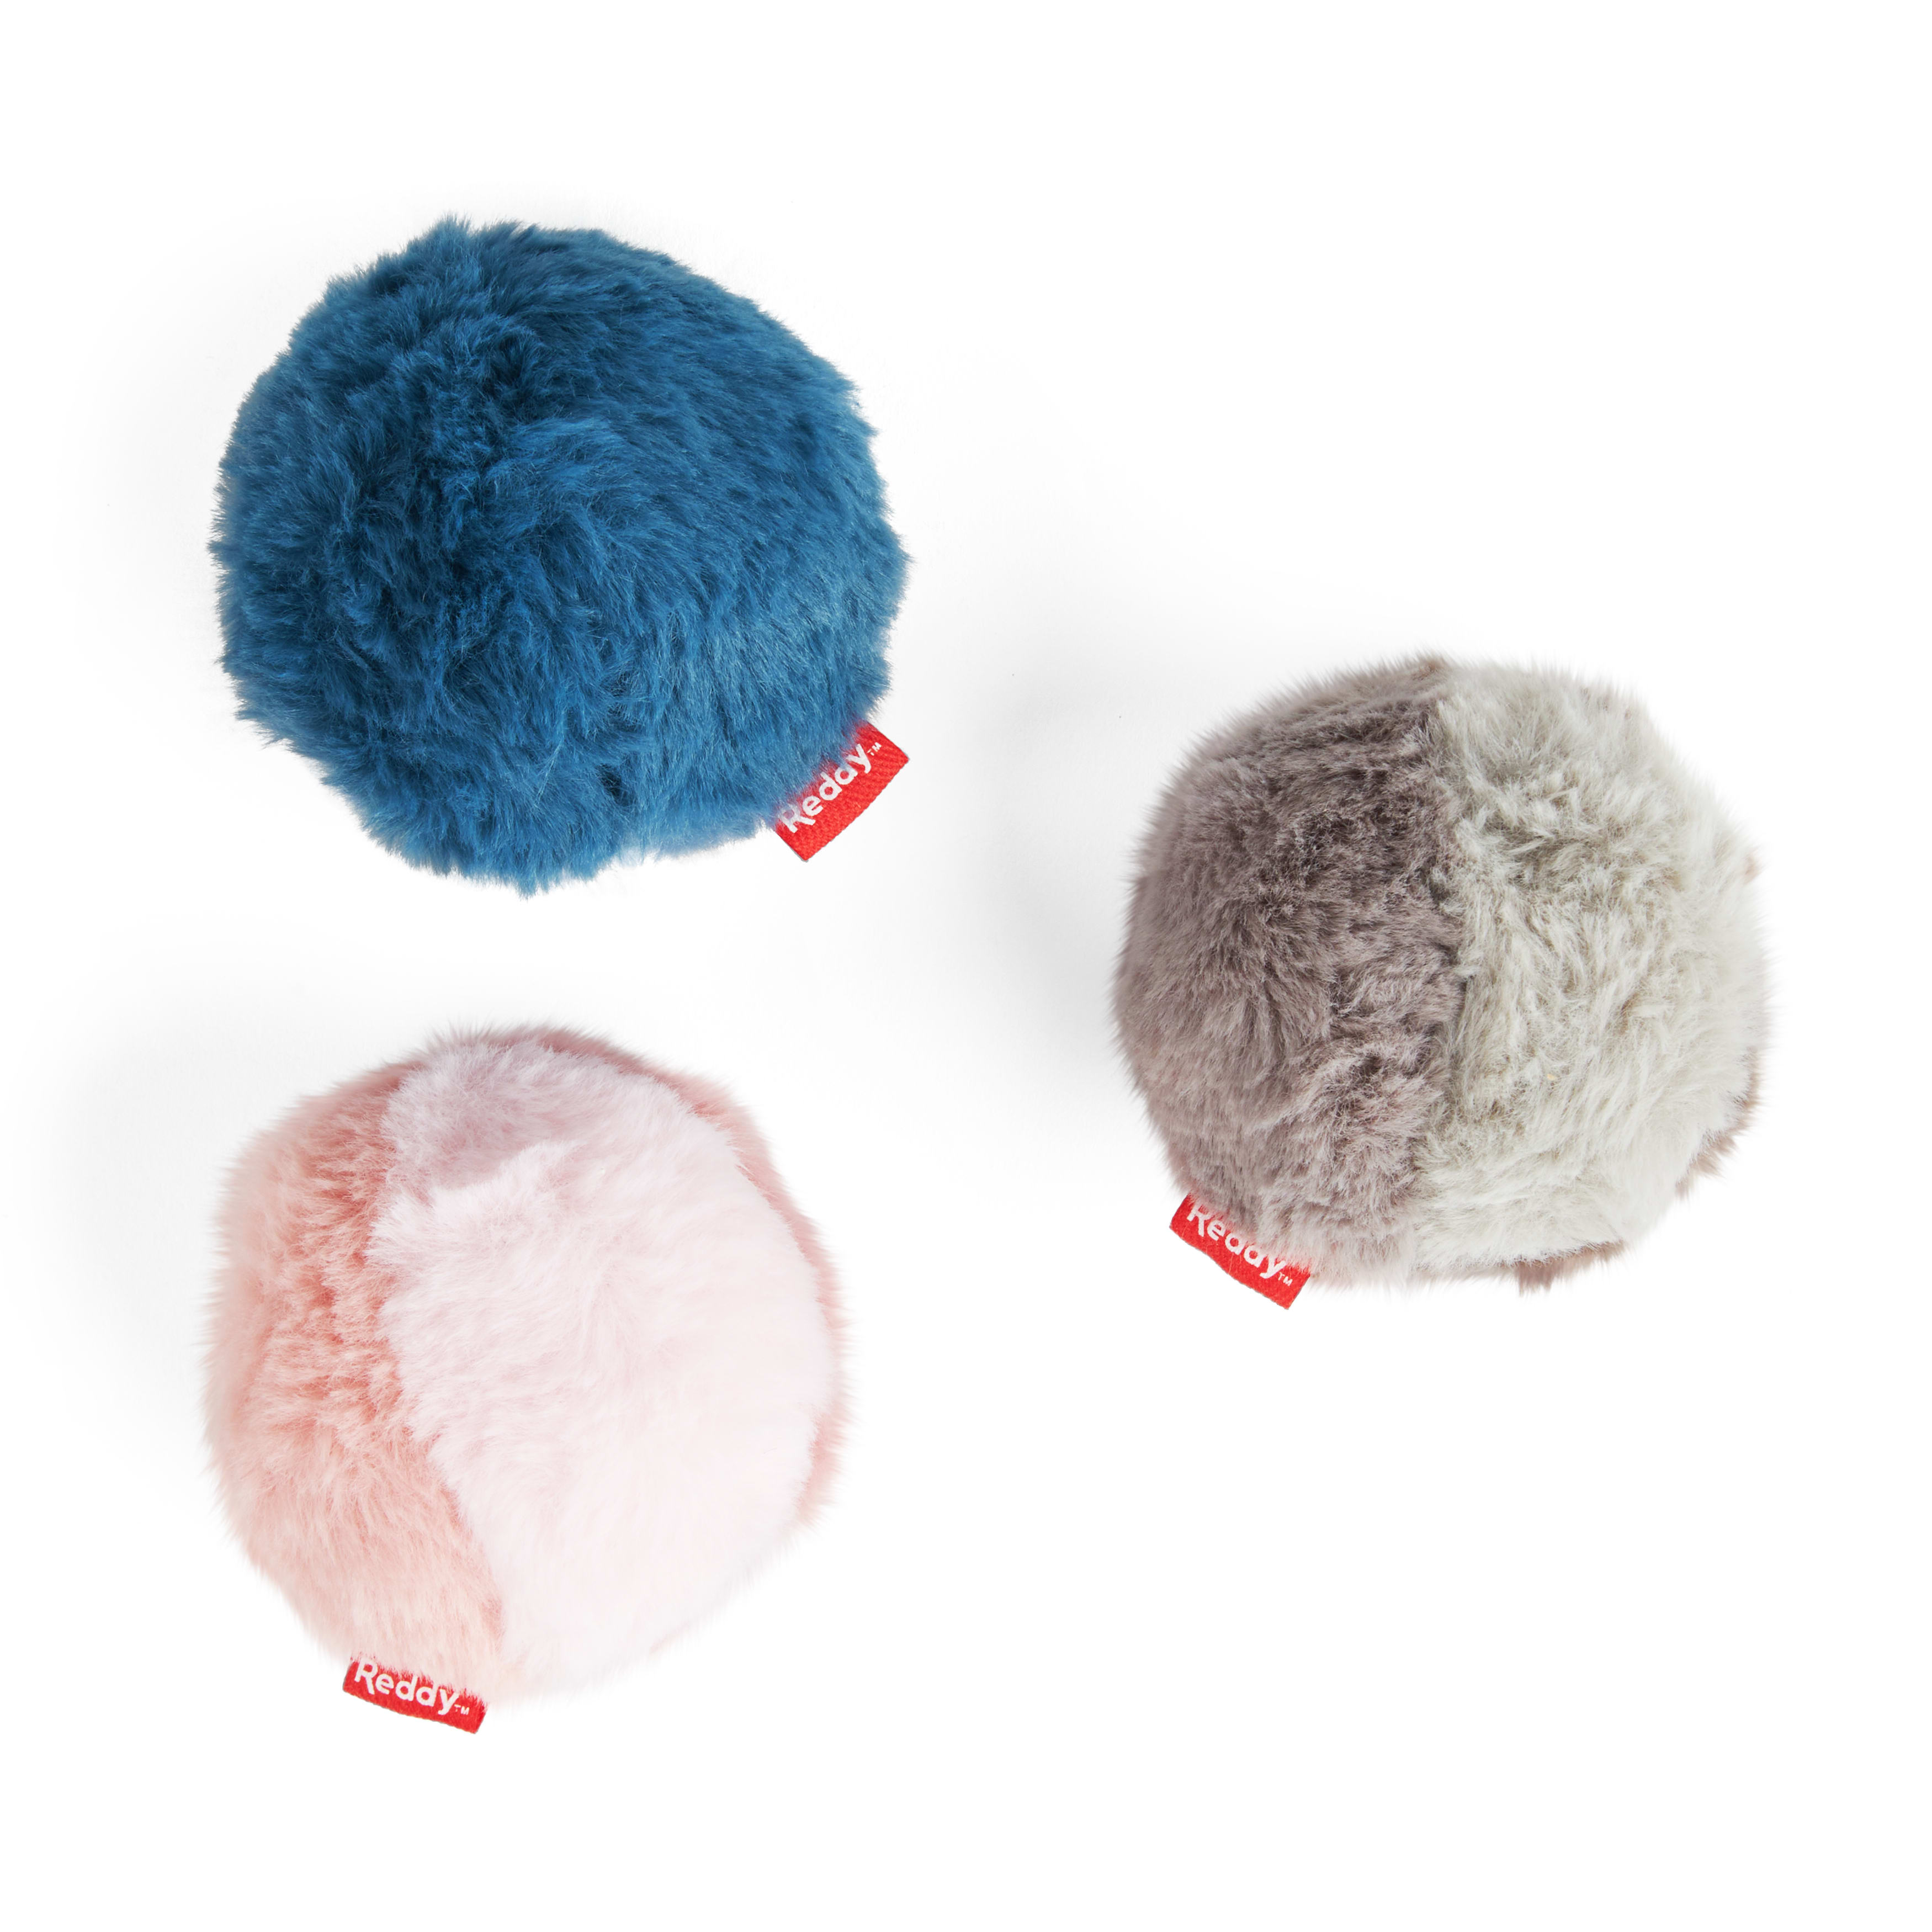 Brighten Up Your Cat's Day With Colorful Pom Pom Balls - Pet Toy!